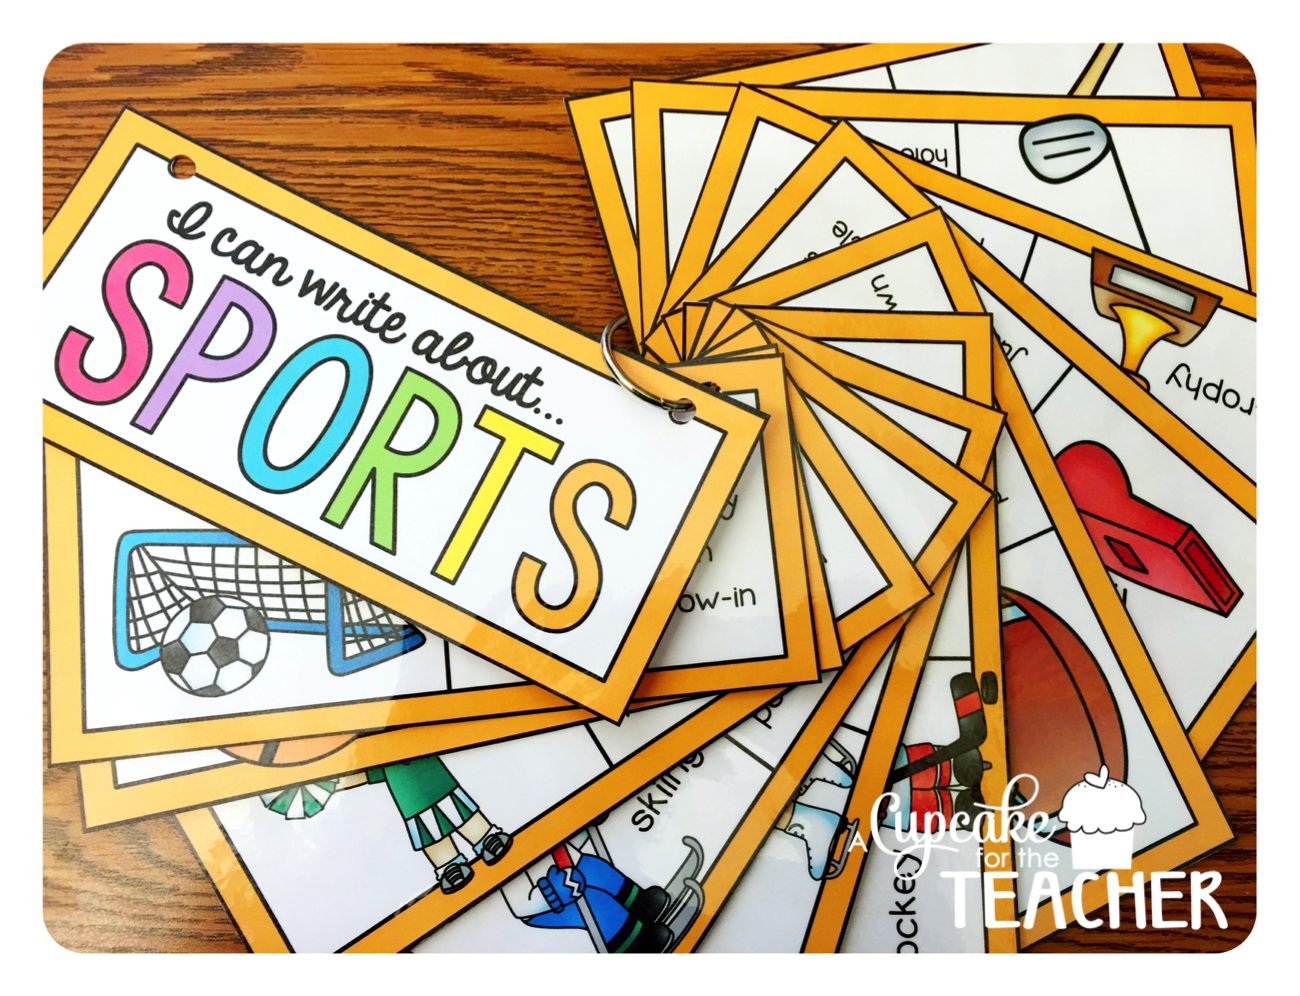 Take a look at the "Sports" topic for my writing topic cards.